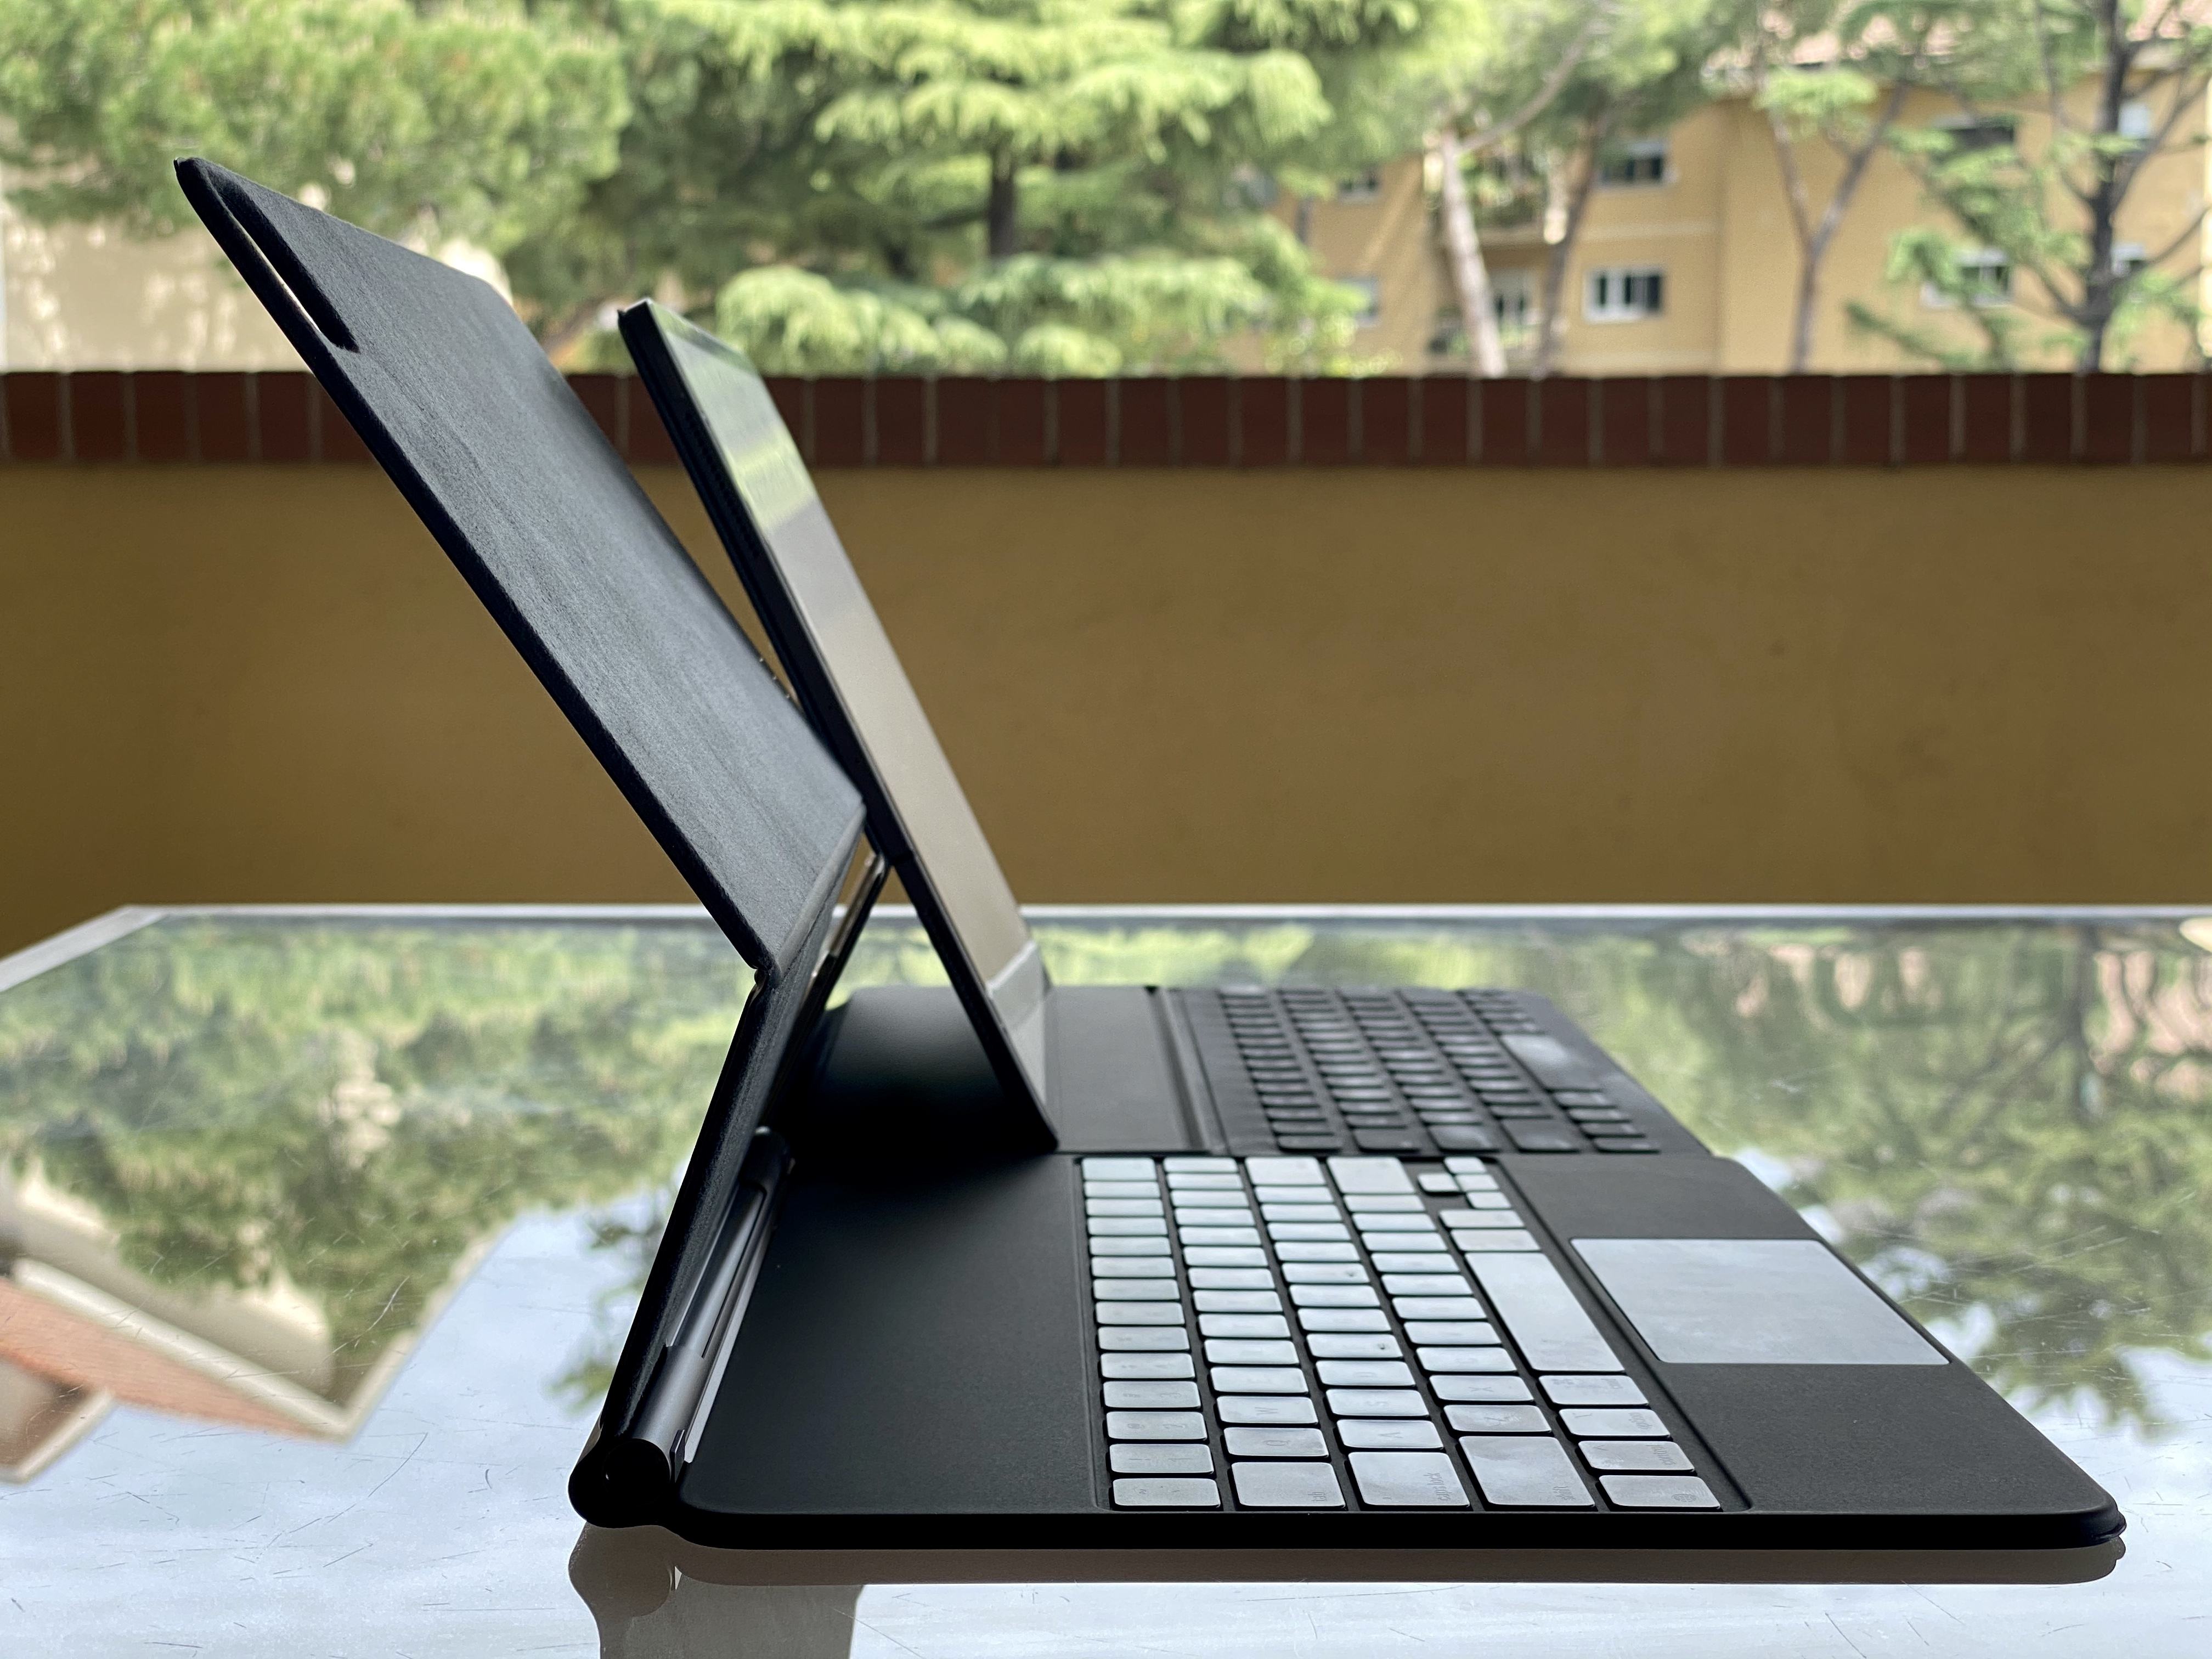 The Smart Keyboard Folio's other viewing angle. The Magic Keyboard can also be adjusted to this position and can create an even steeper angle.